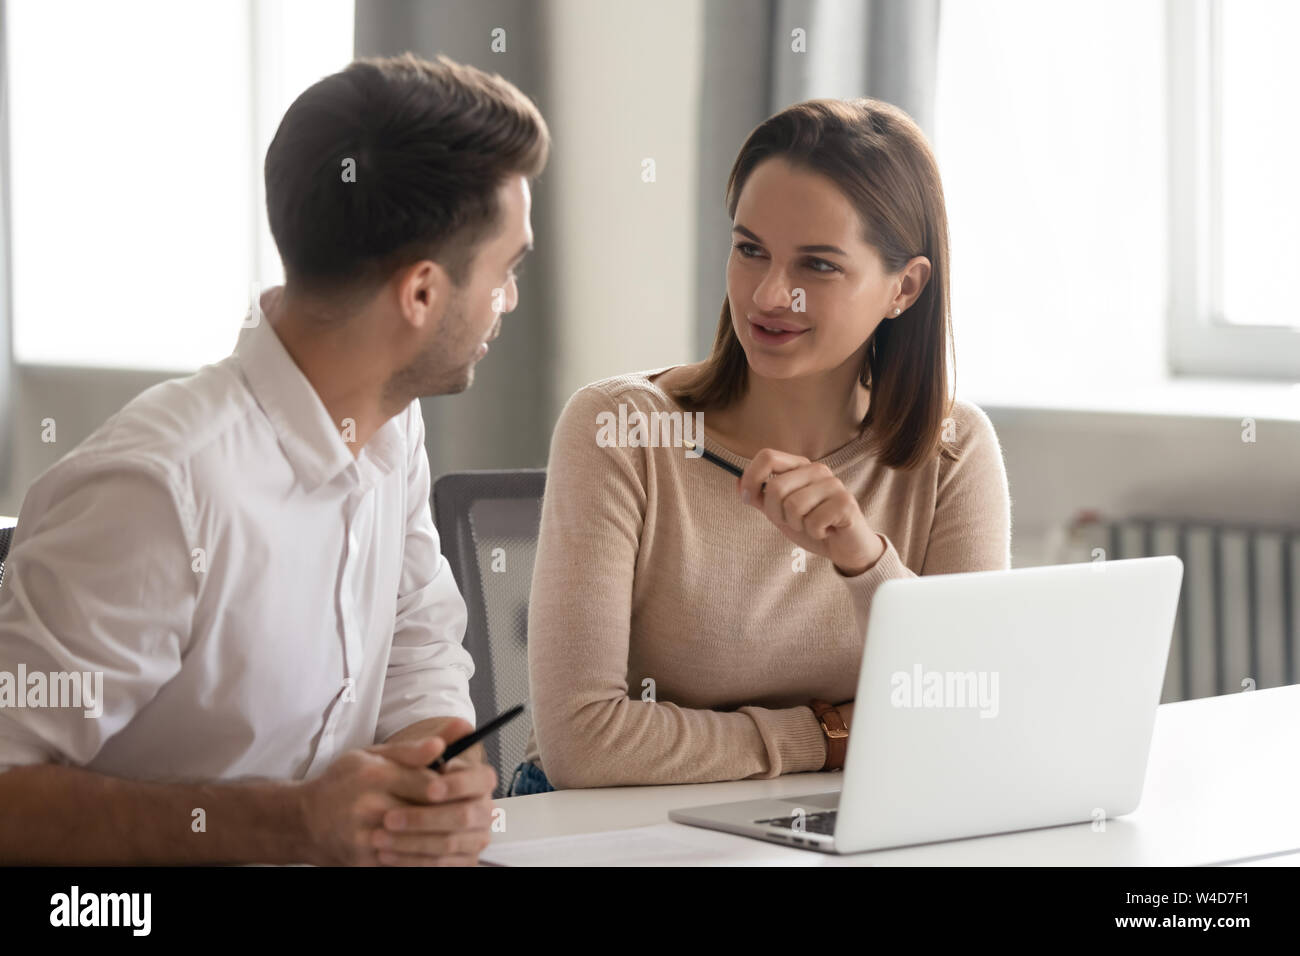 Creative male and female colleagues talking at work share ideas Stock Photo